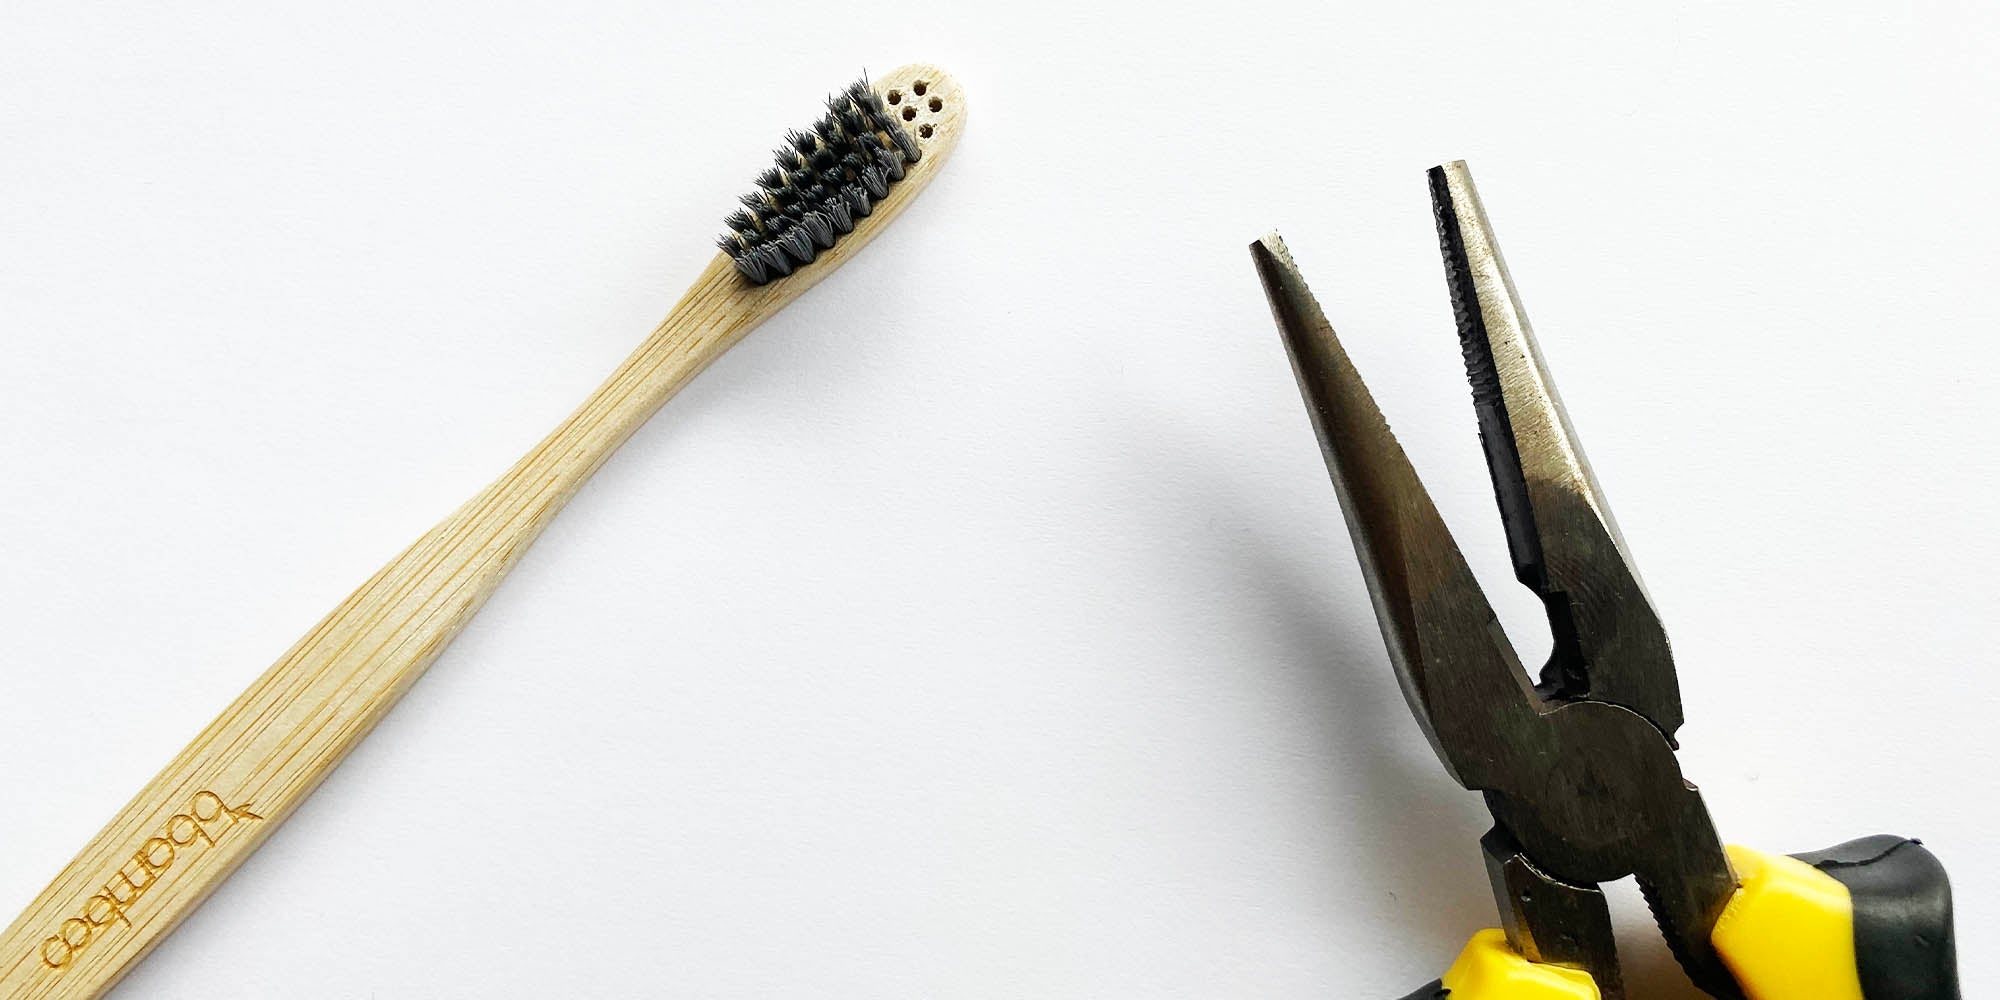 Comment recycler sa brosse à dents en bambou? - Bbamboo